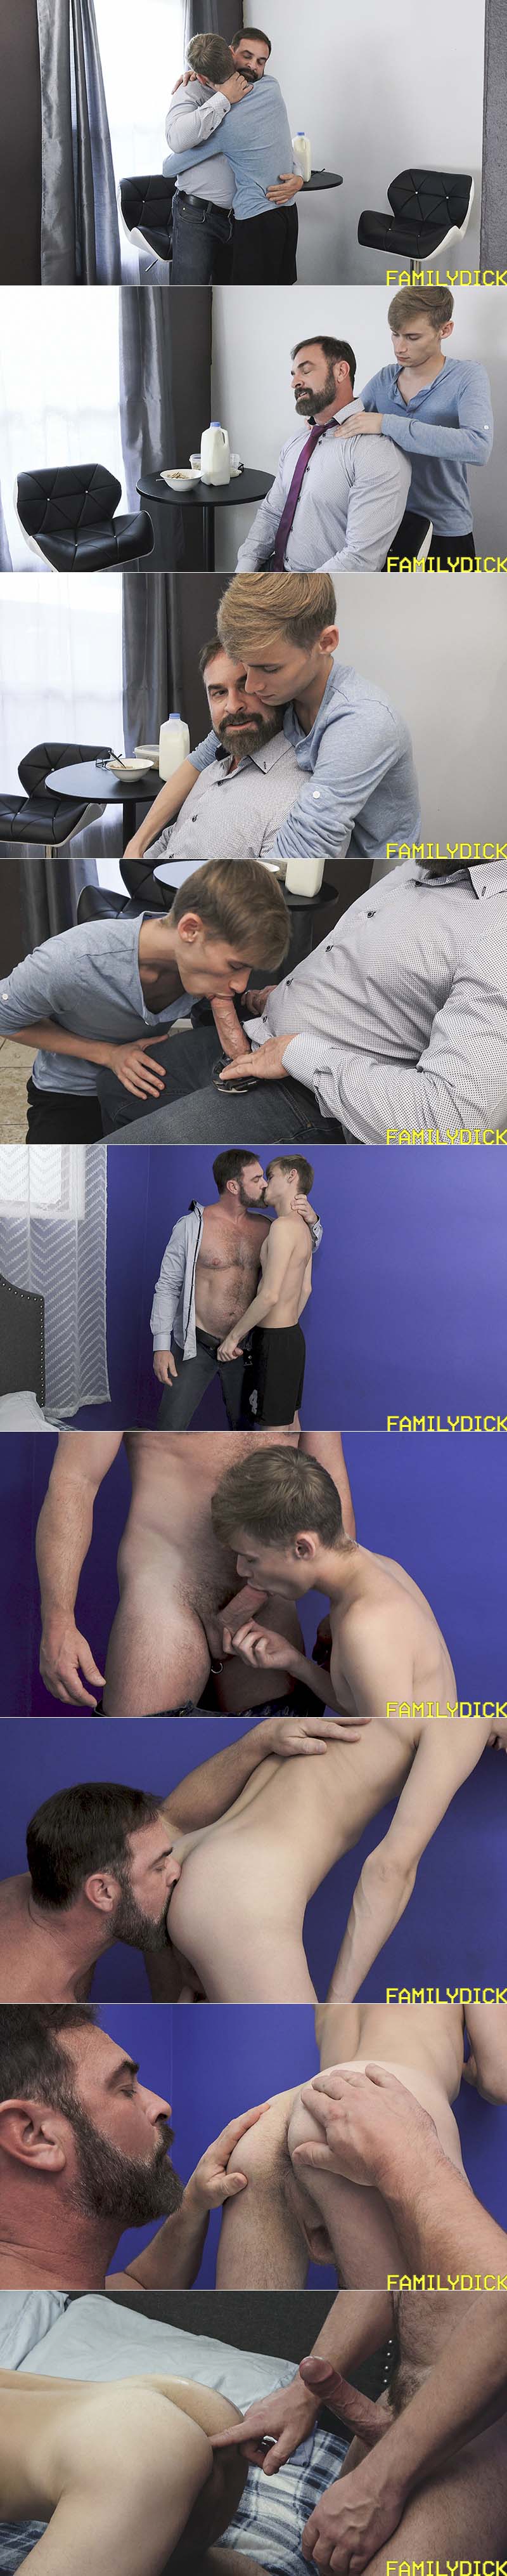 A Father's Love, Chapter One (Kristofer Weston Fucks Oliver Star) at FamilyDick